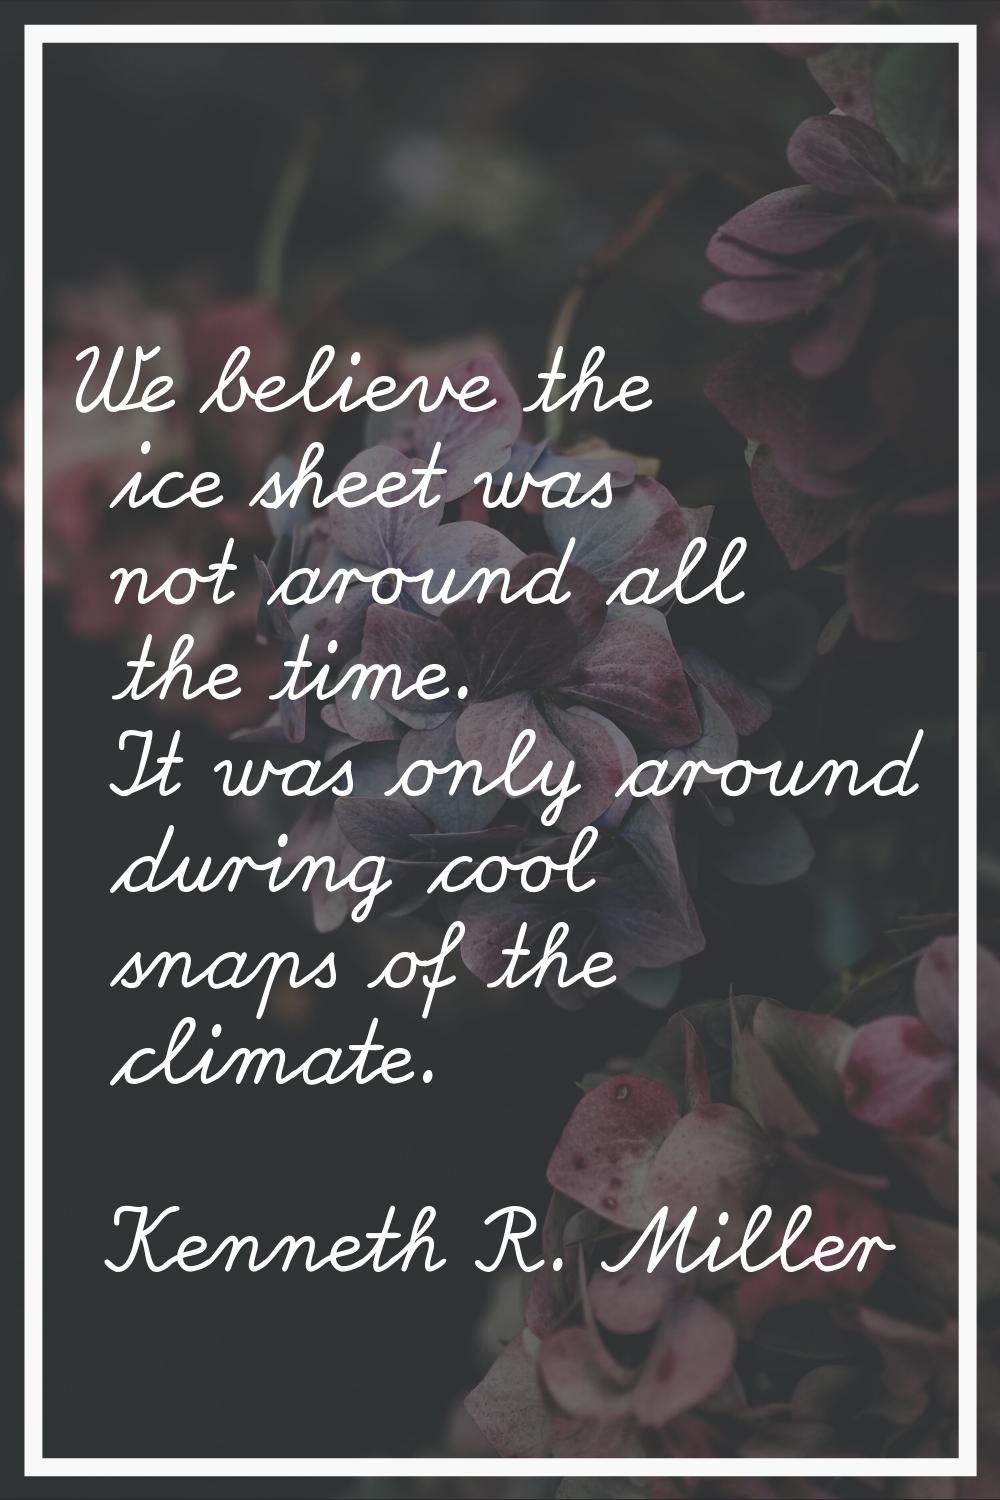 We believe the ice sheet was not around all the time. It was only around during cool snaps of the c